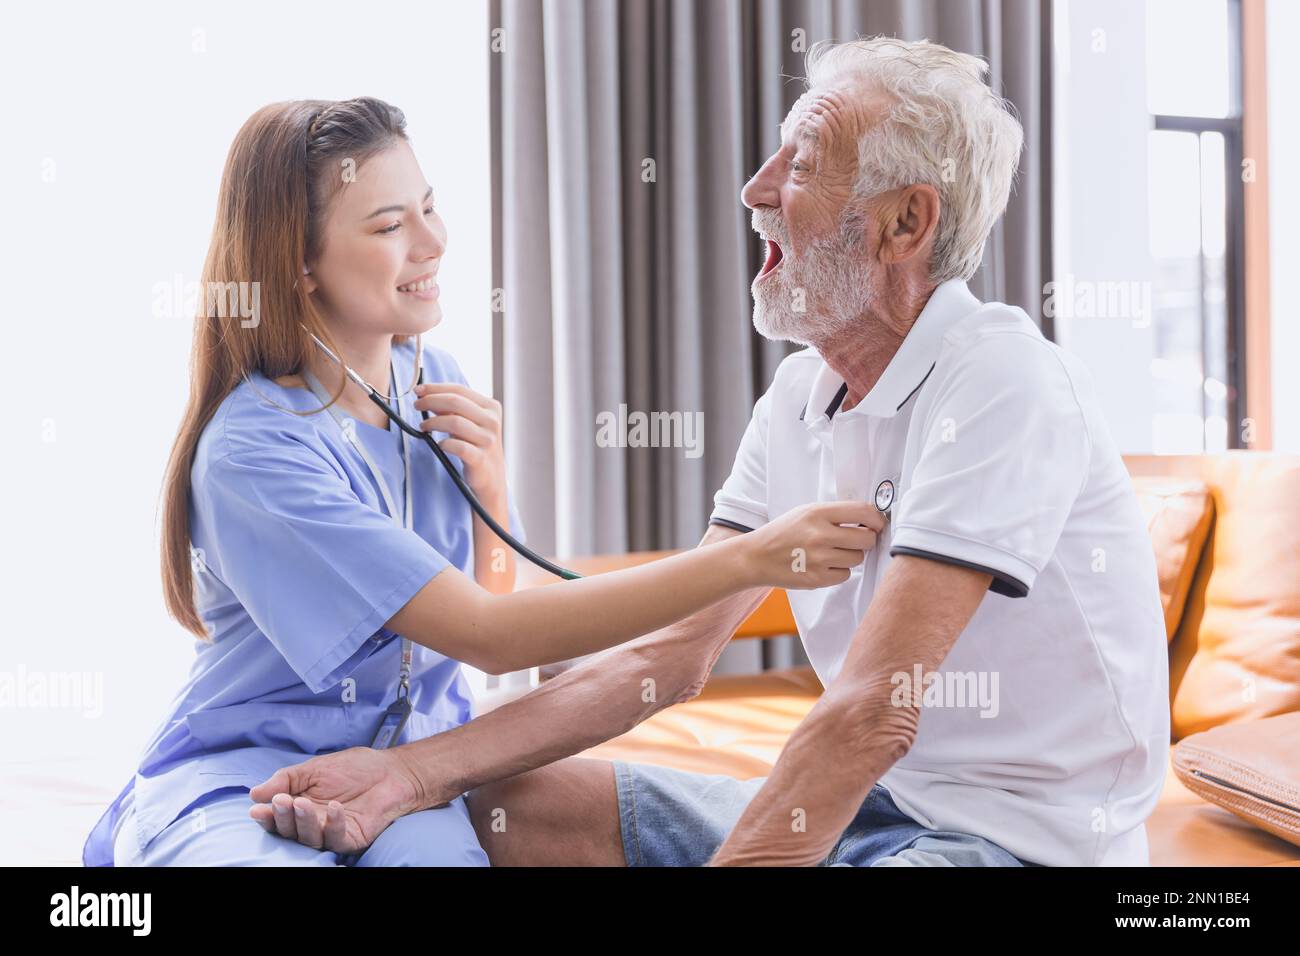 Nurse doctor working at home care medical checkup healthy elderly senior male happy smile Stock Photo